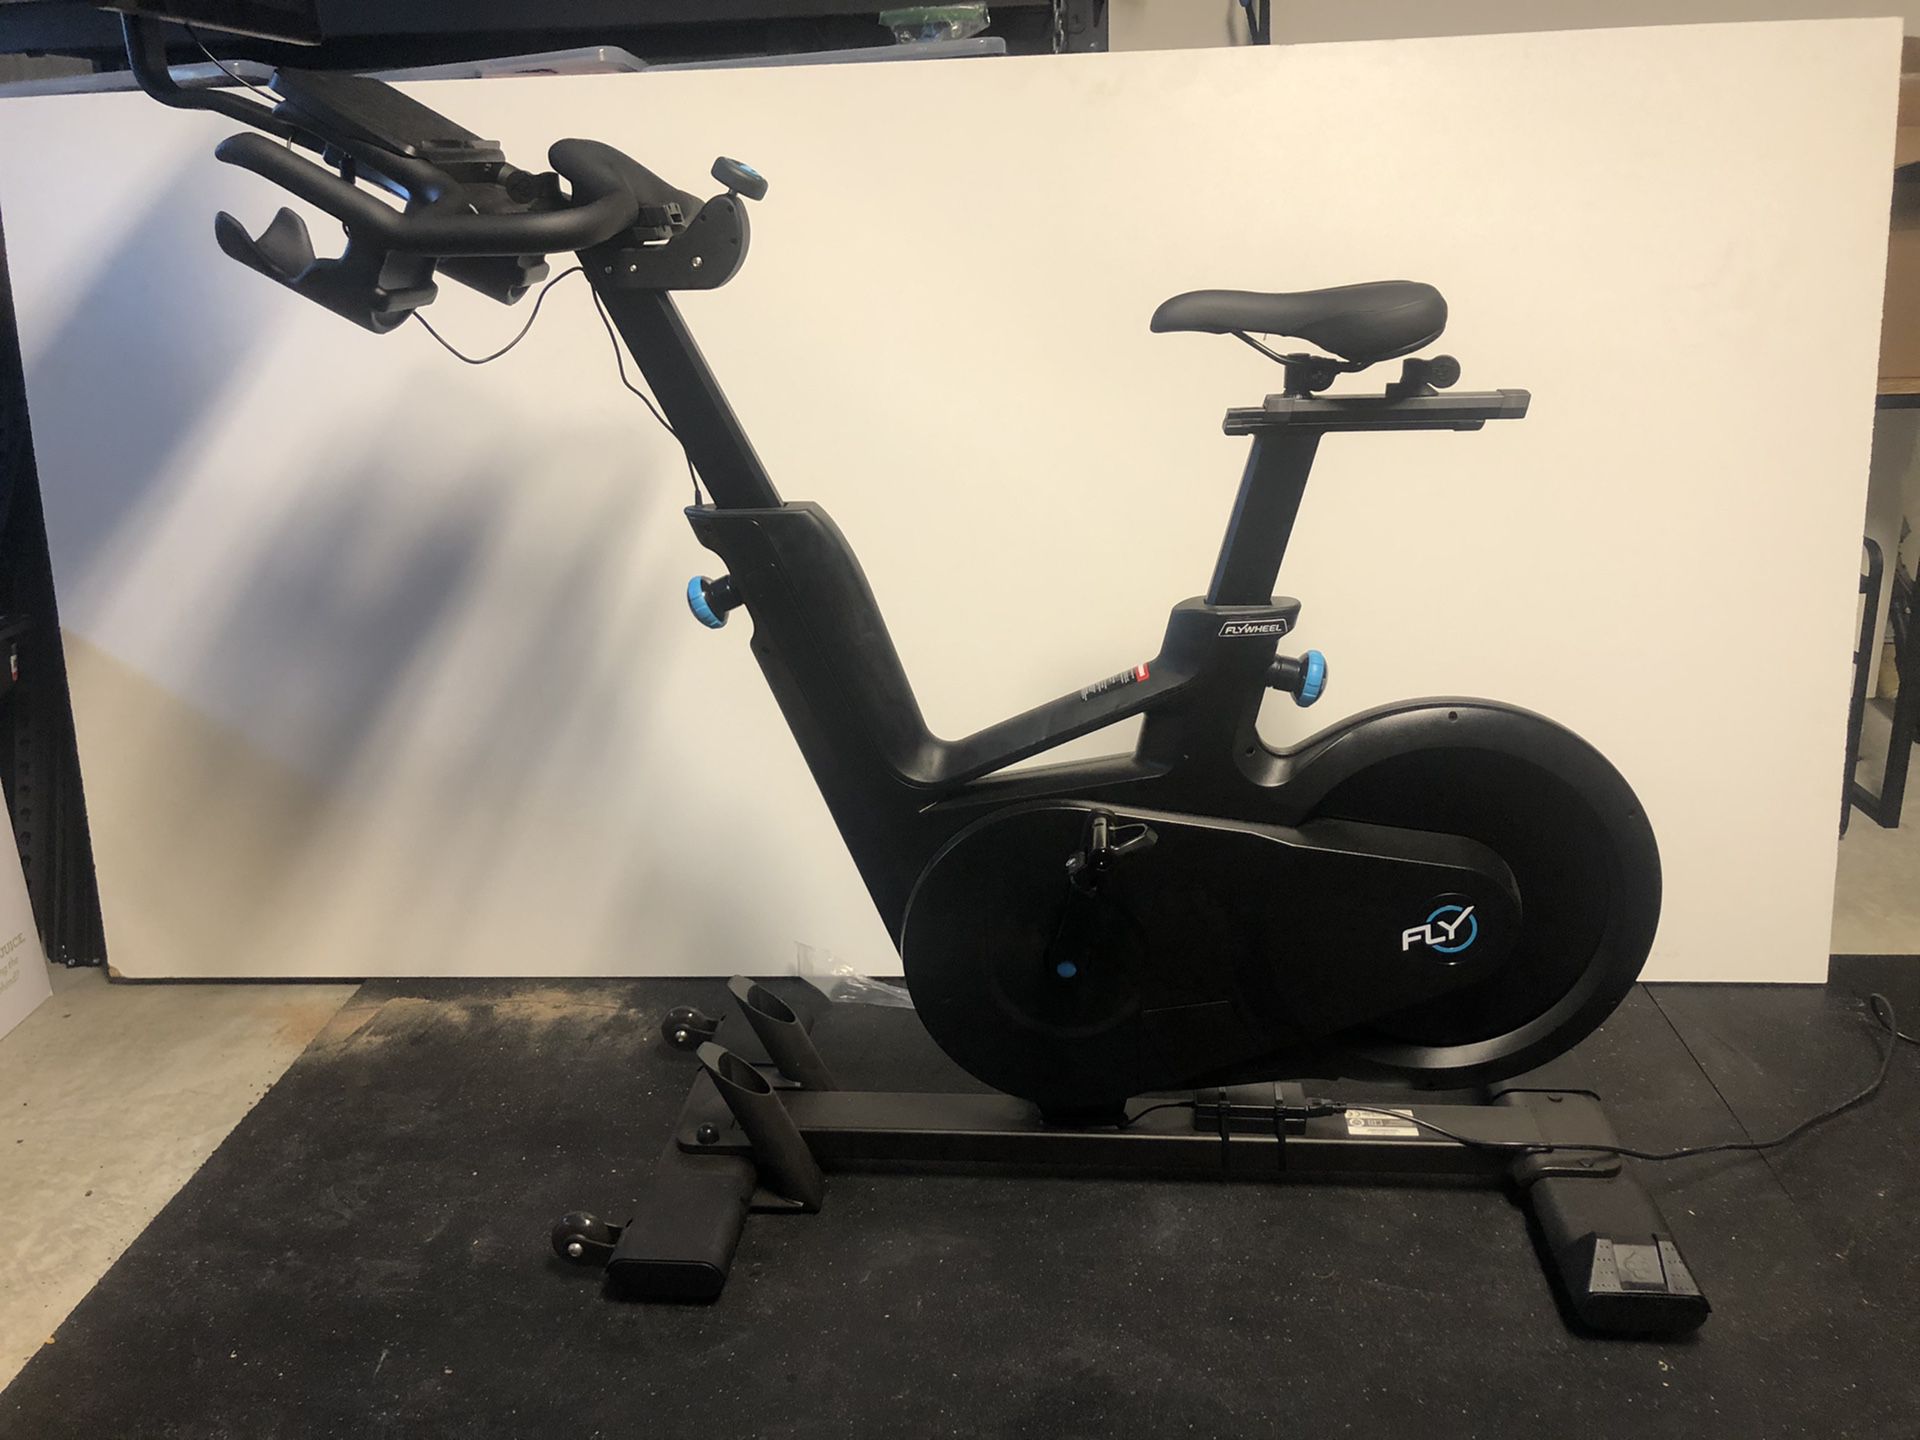 Flywheel fly at home exercise bike